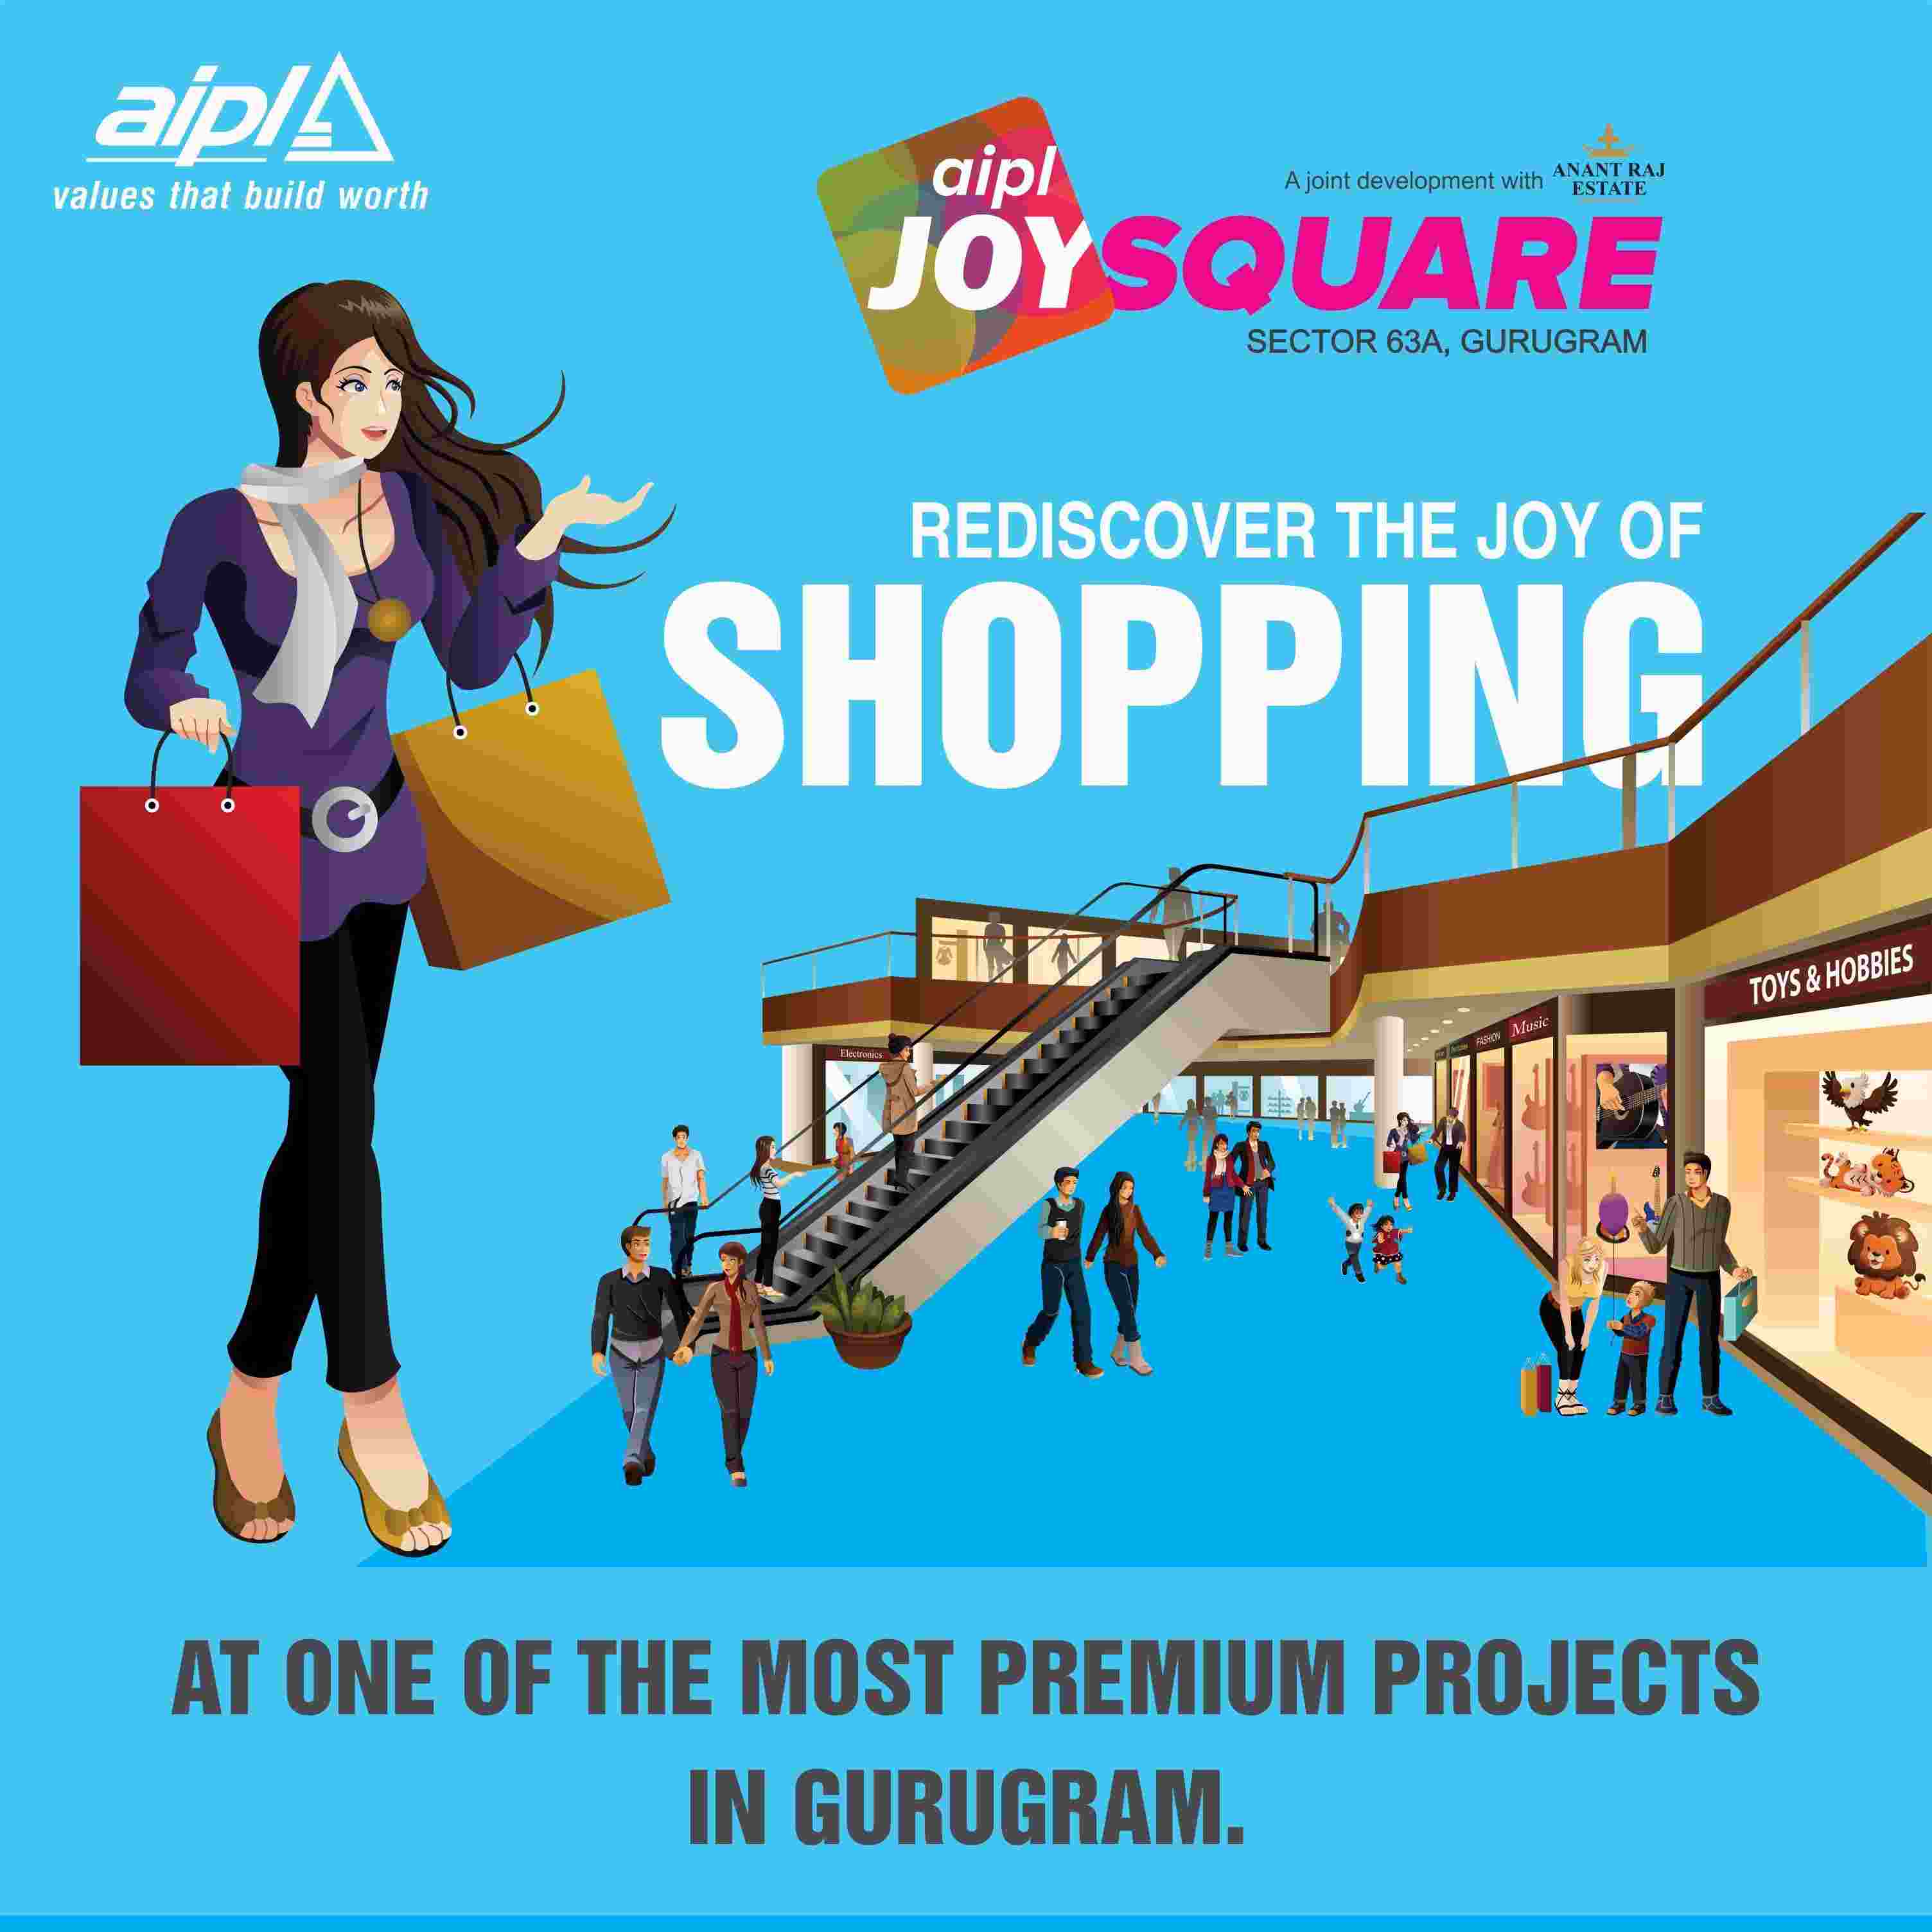 Rediscover the joy of shopping at AIPL Joy Square which is one of the most premium projects in Gurugram Update